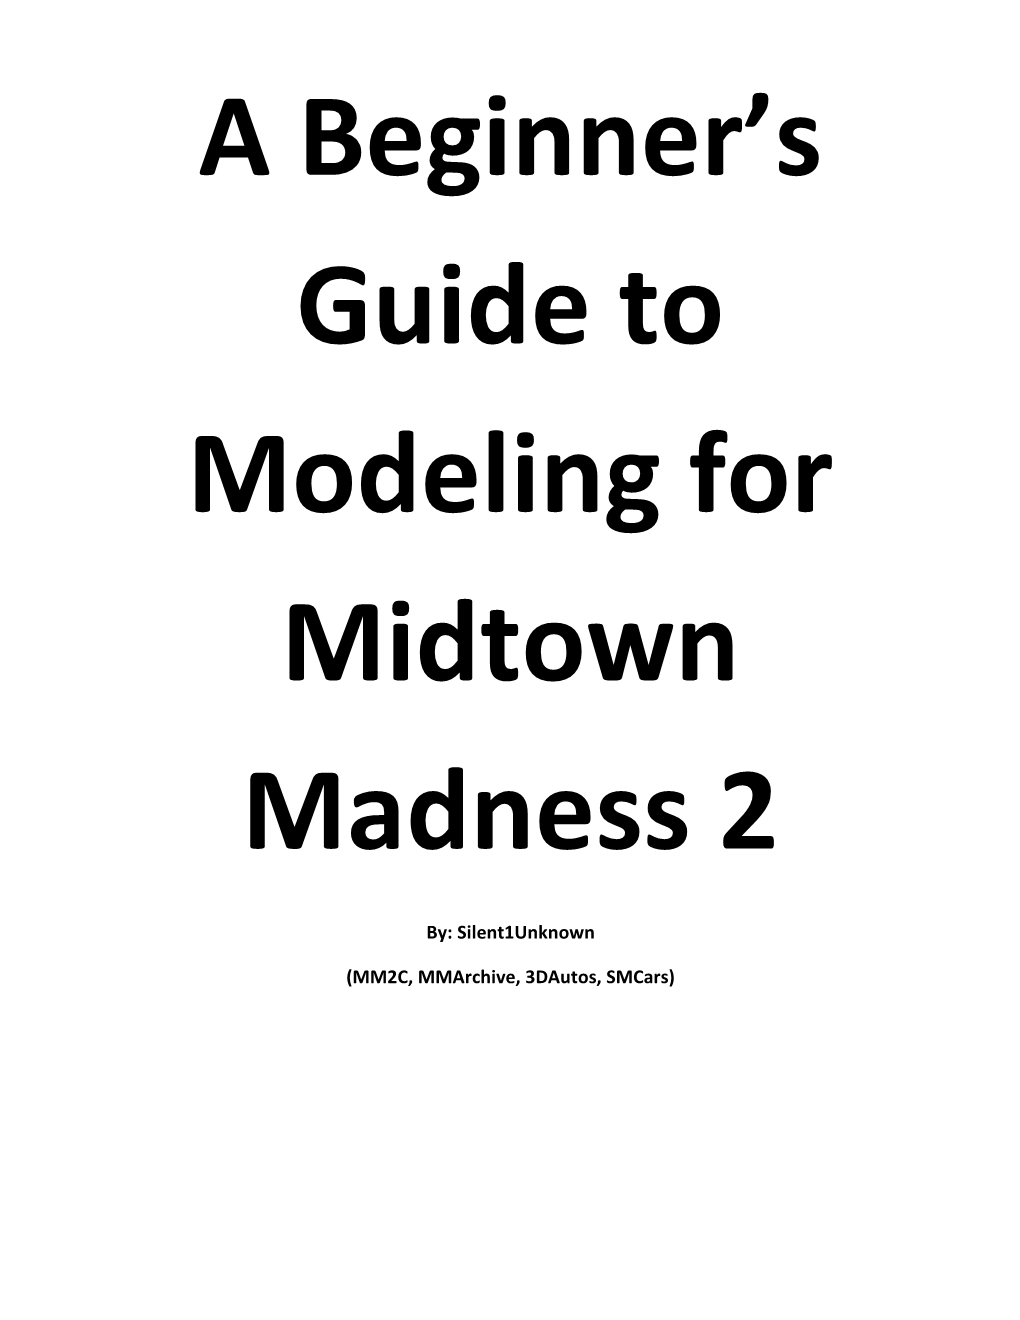 A Beginner's Guide to Modeling For